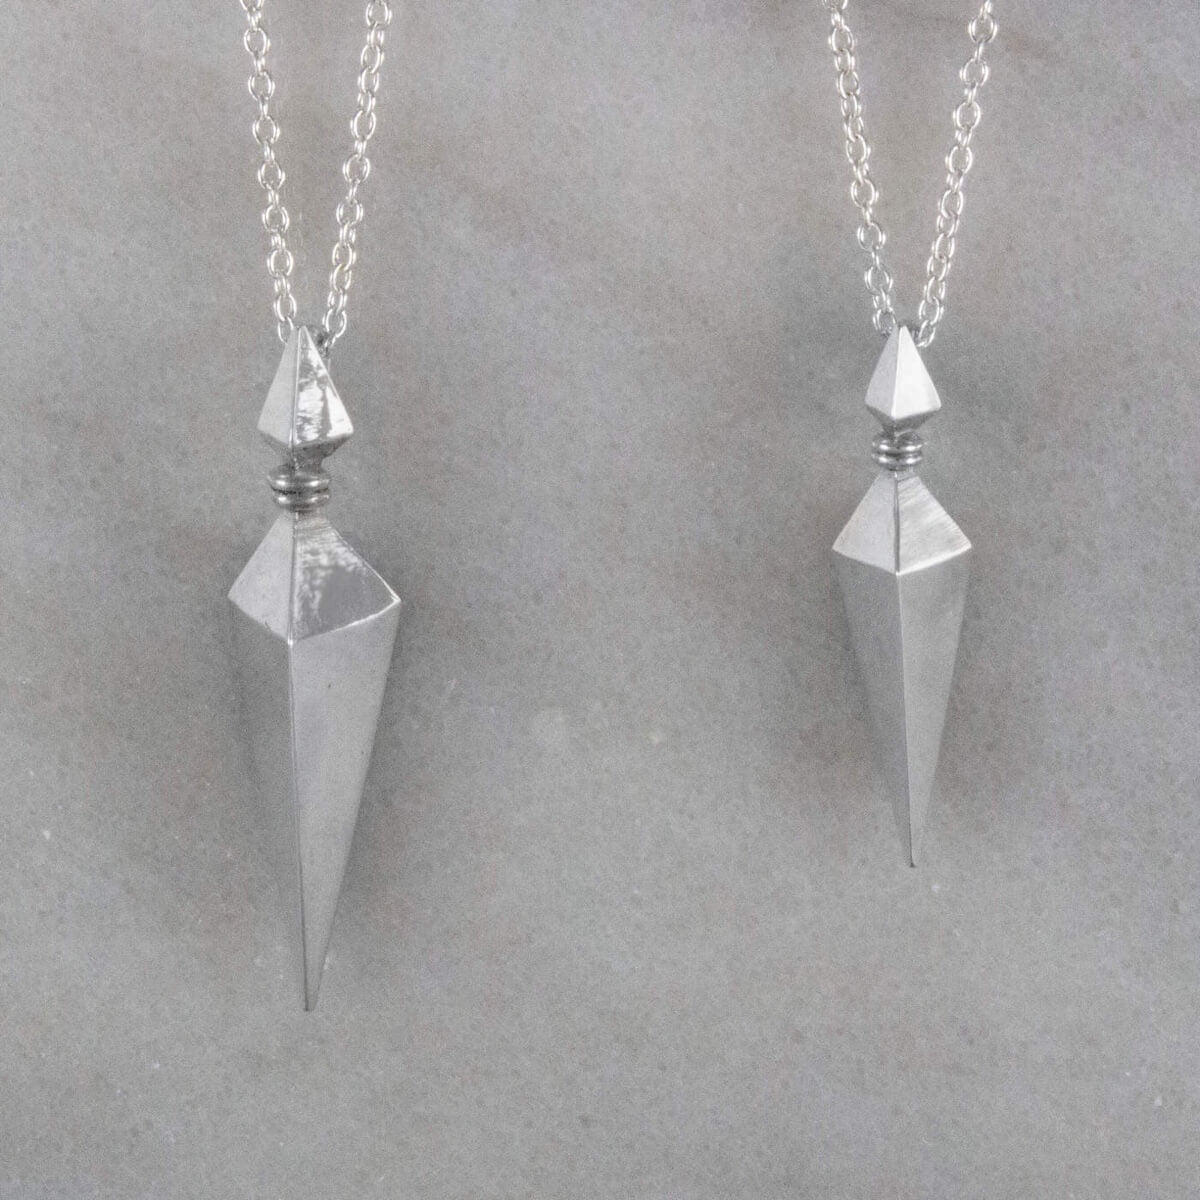 Large and Small Silver Pyramid Spike Pendants on Silver Chains Straight On View